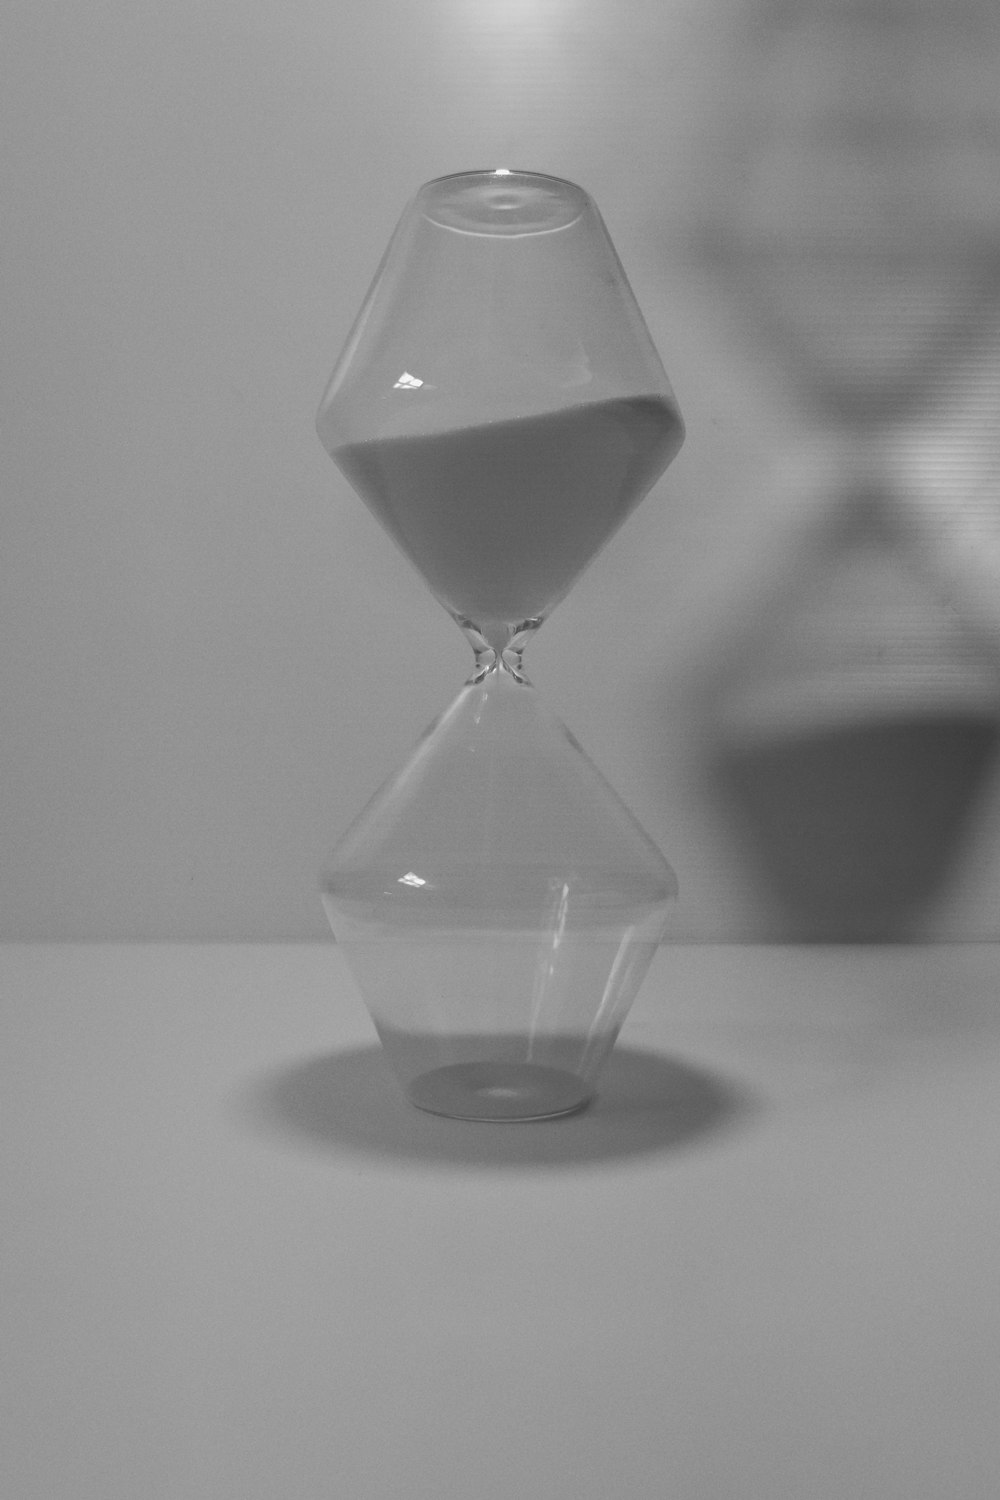 clear hour glass on white table